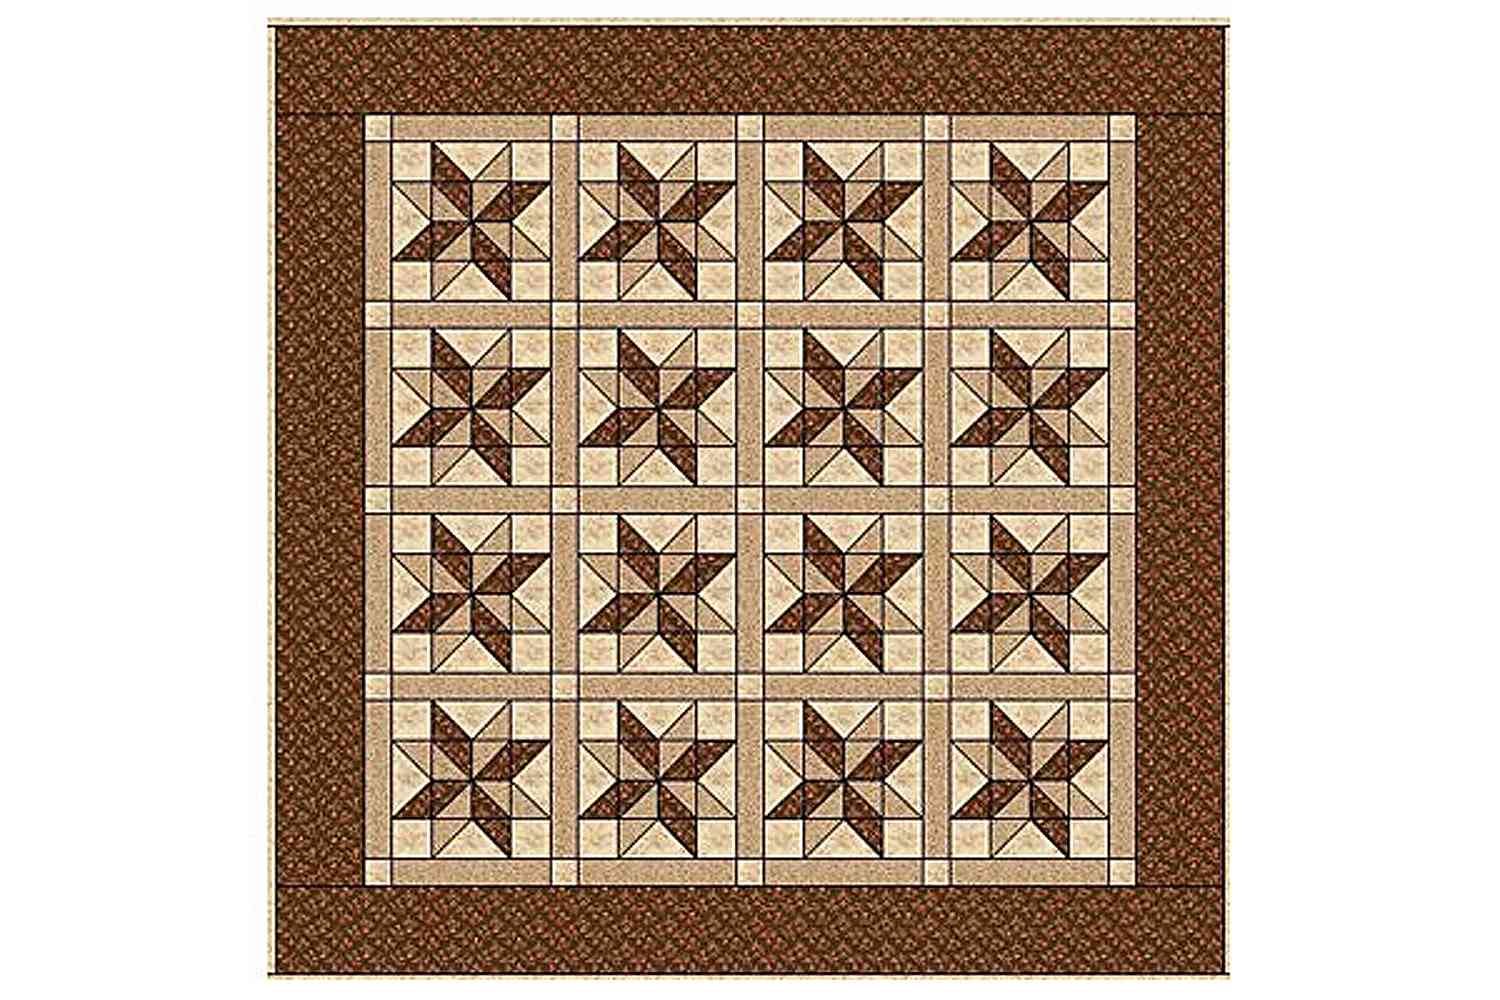 Sarah's Choice Quilt in a Horizontal Setting